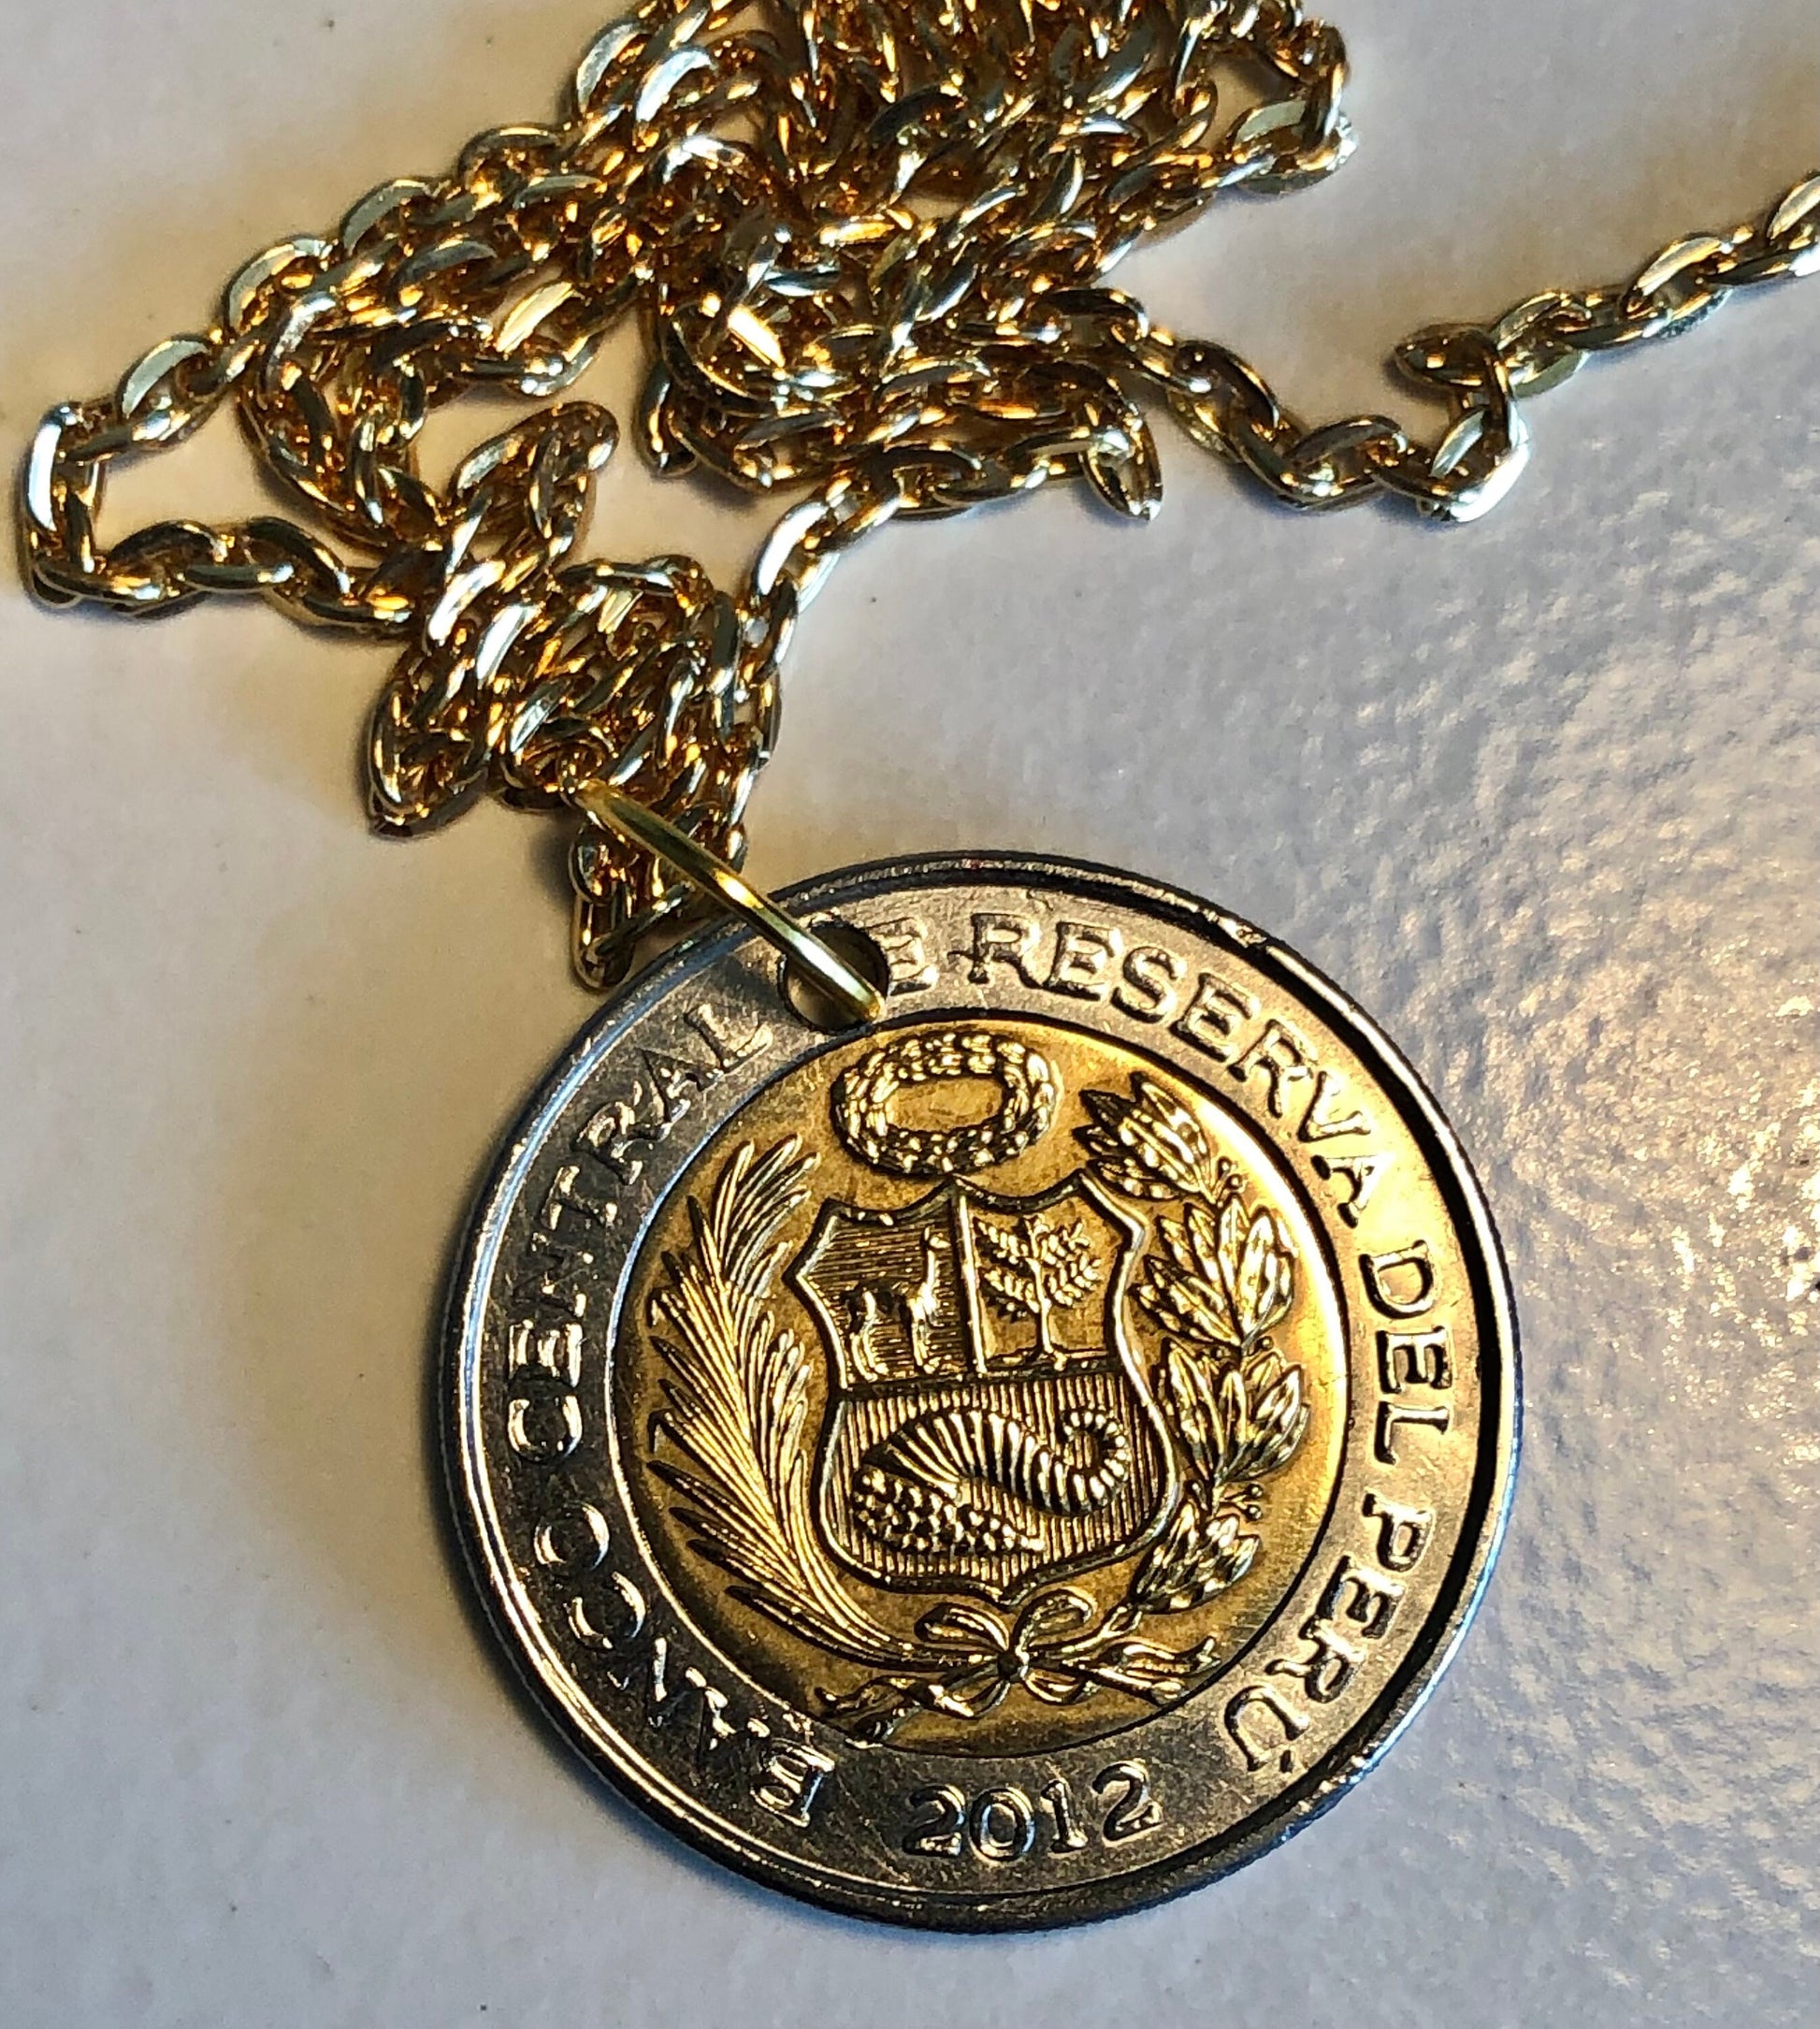 Peru Coin Pendant Peruvian 5 Nuevos Soles Personal Vintage Necklace Old Handmade Jewelry Gift Friend Charm For Him Her World Coin Collector